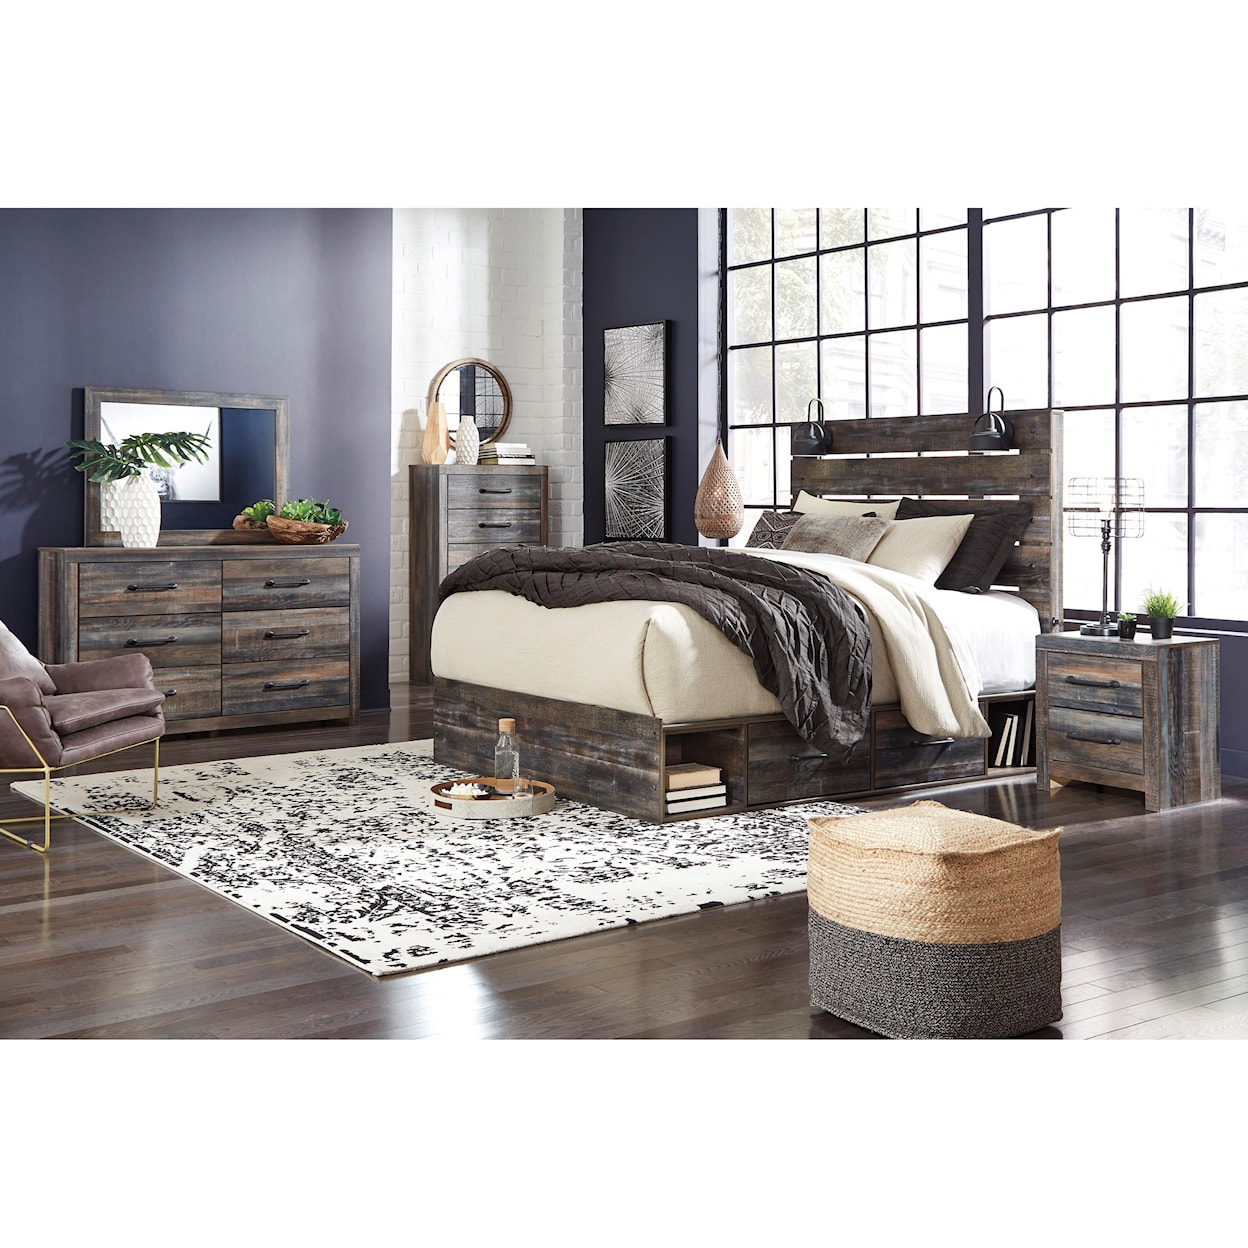 Ashley Furniture Signature Design Drystan Queen Storage Bed with 4 Drawers